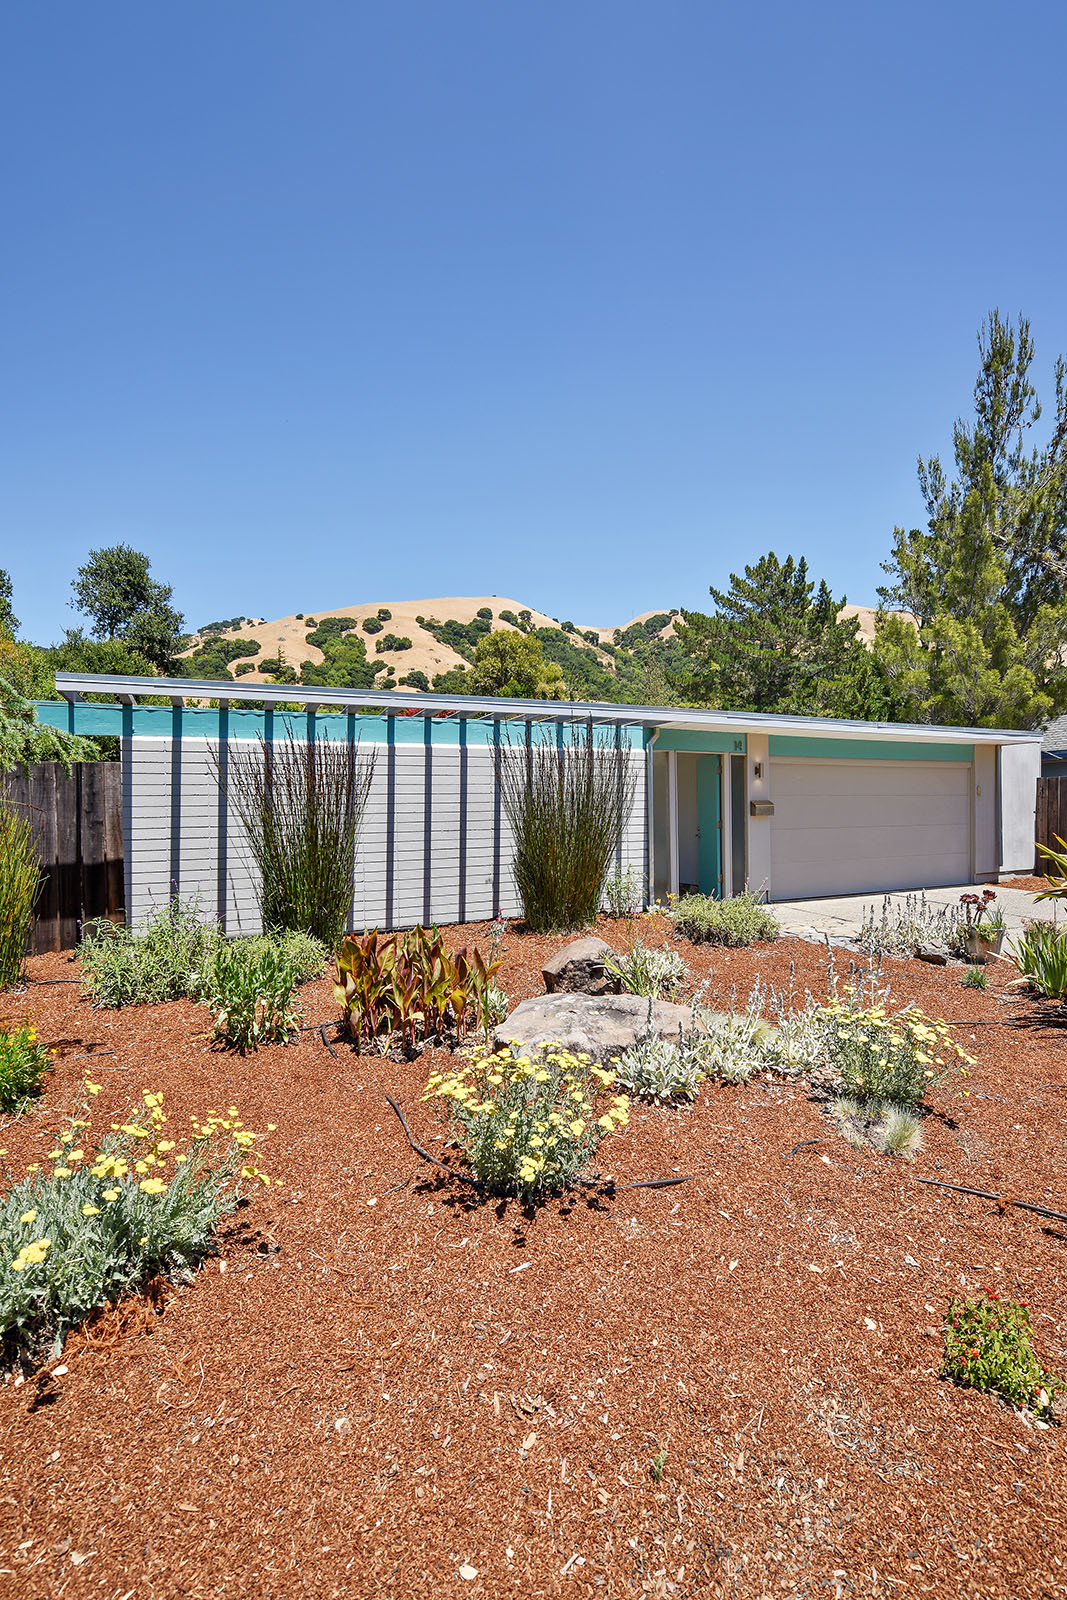 Exterior of Eichler in blue and grey.